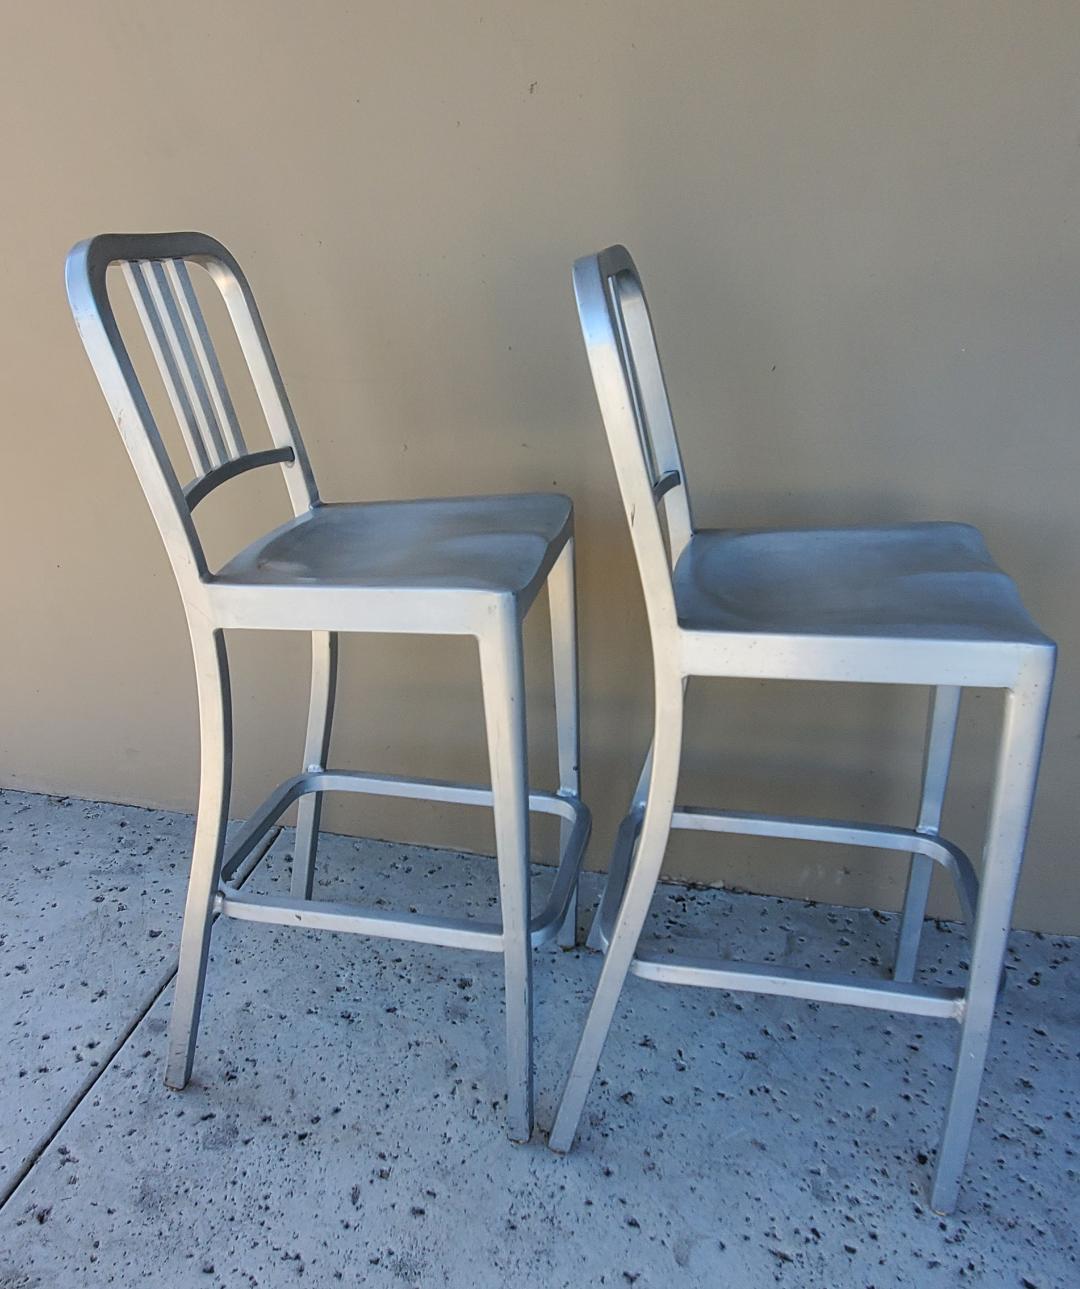 2 Bar Stools Tall Brushed Aluminum Indoor Outdoor EMECO Barstools Labeled For Sale 3